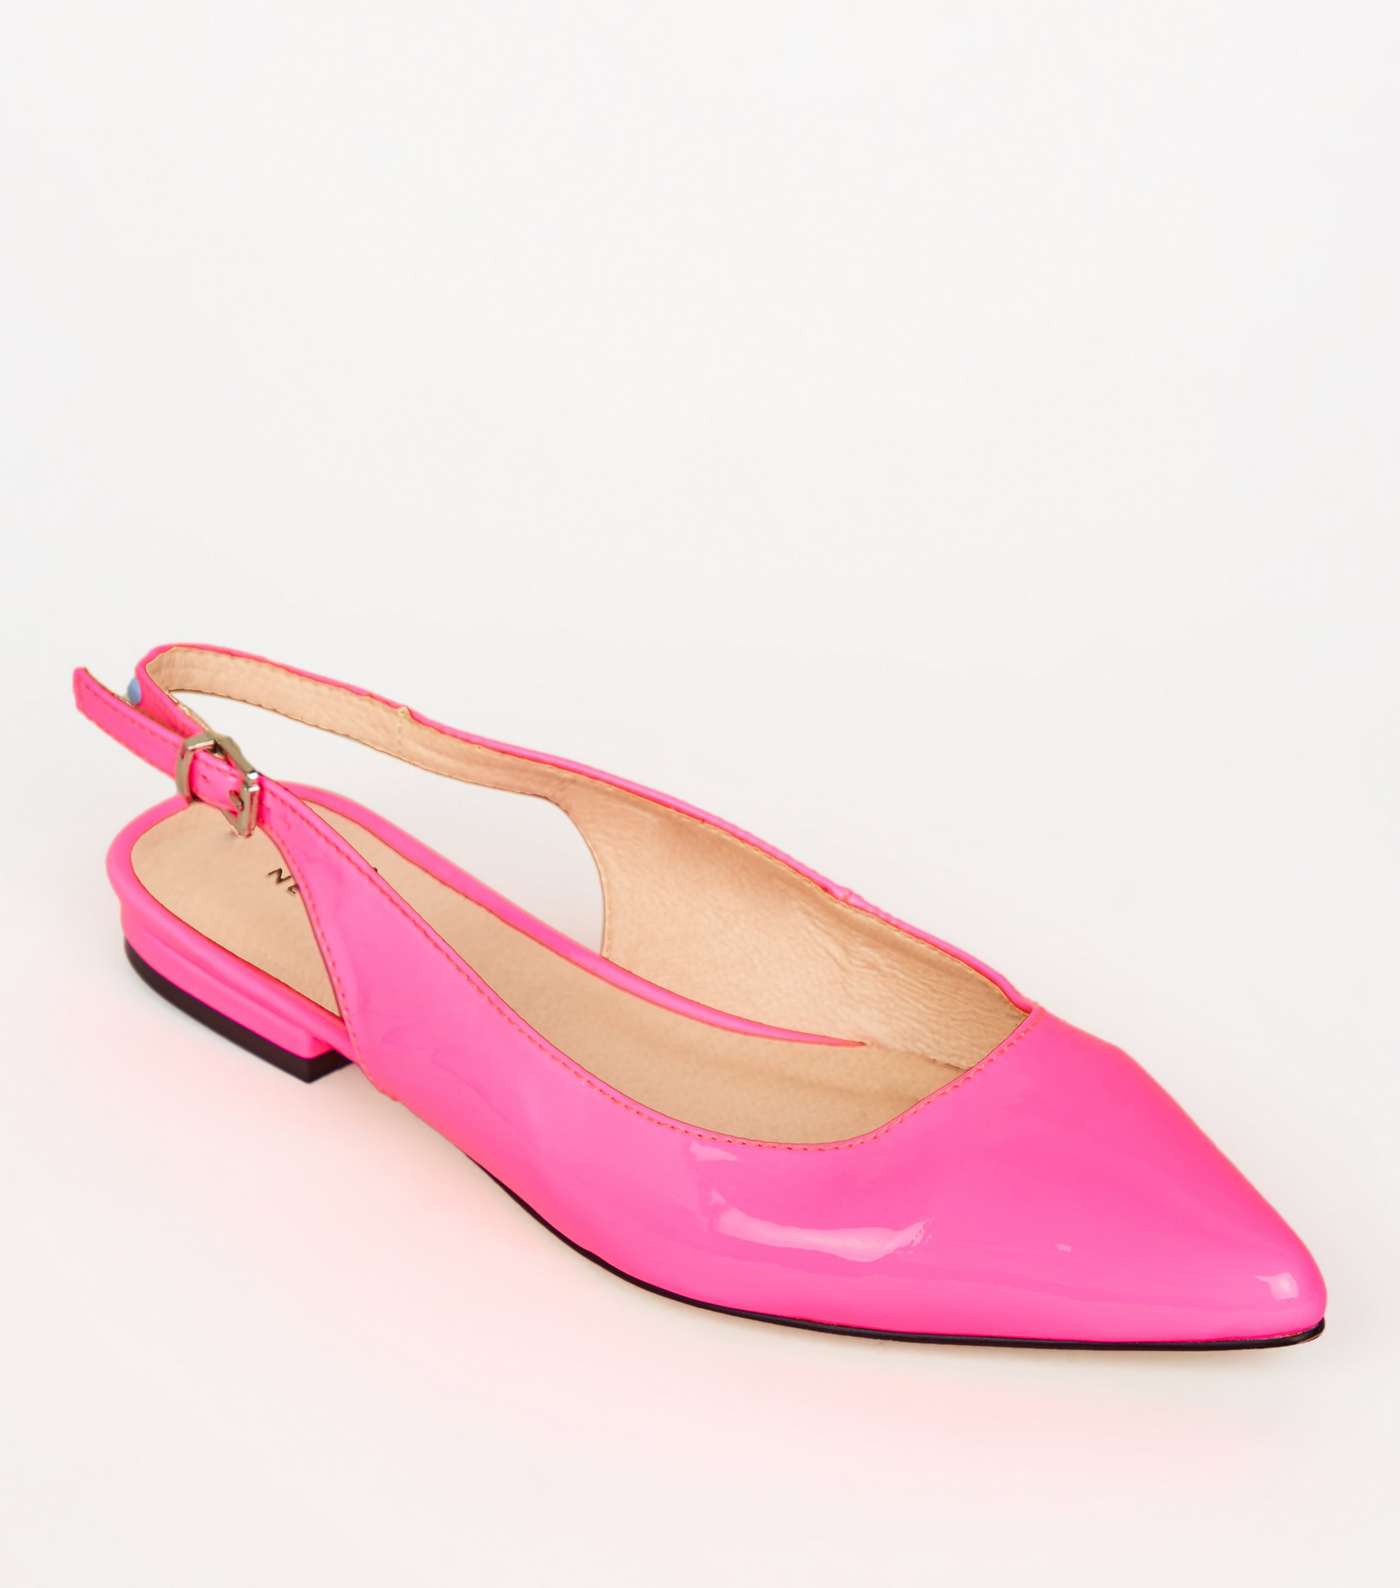 Bright Pink Neon Leather-Look Slingbacks